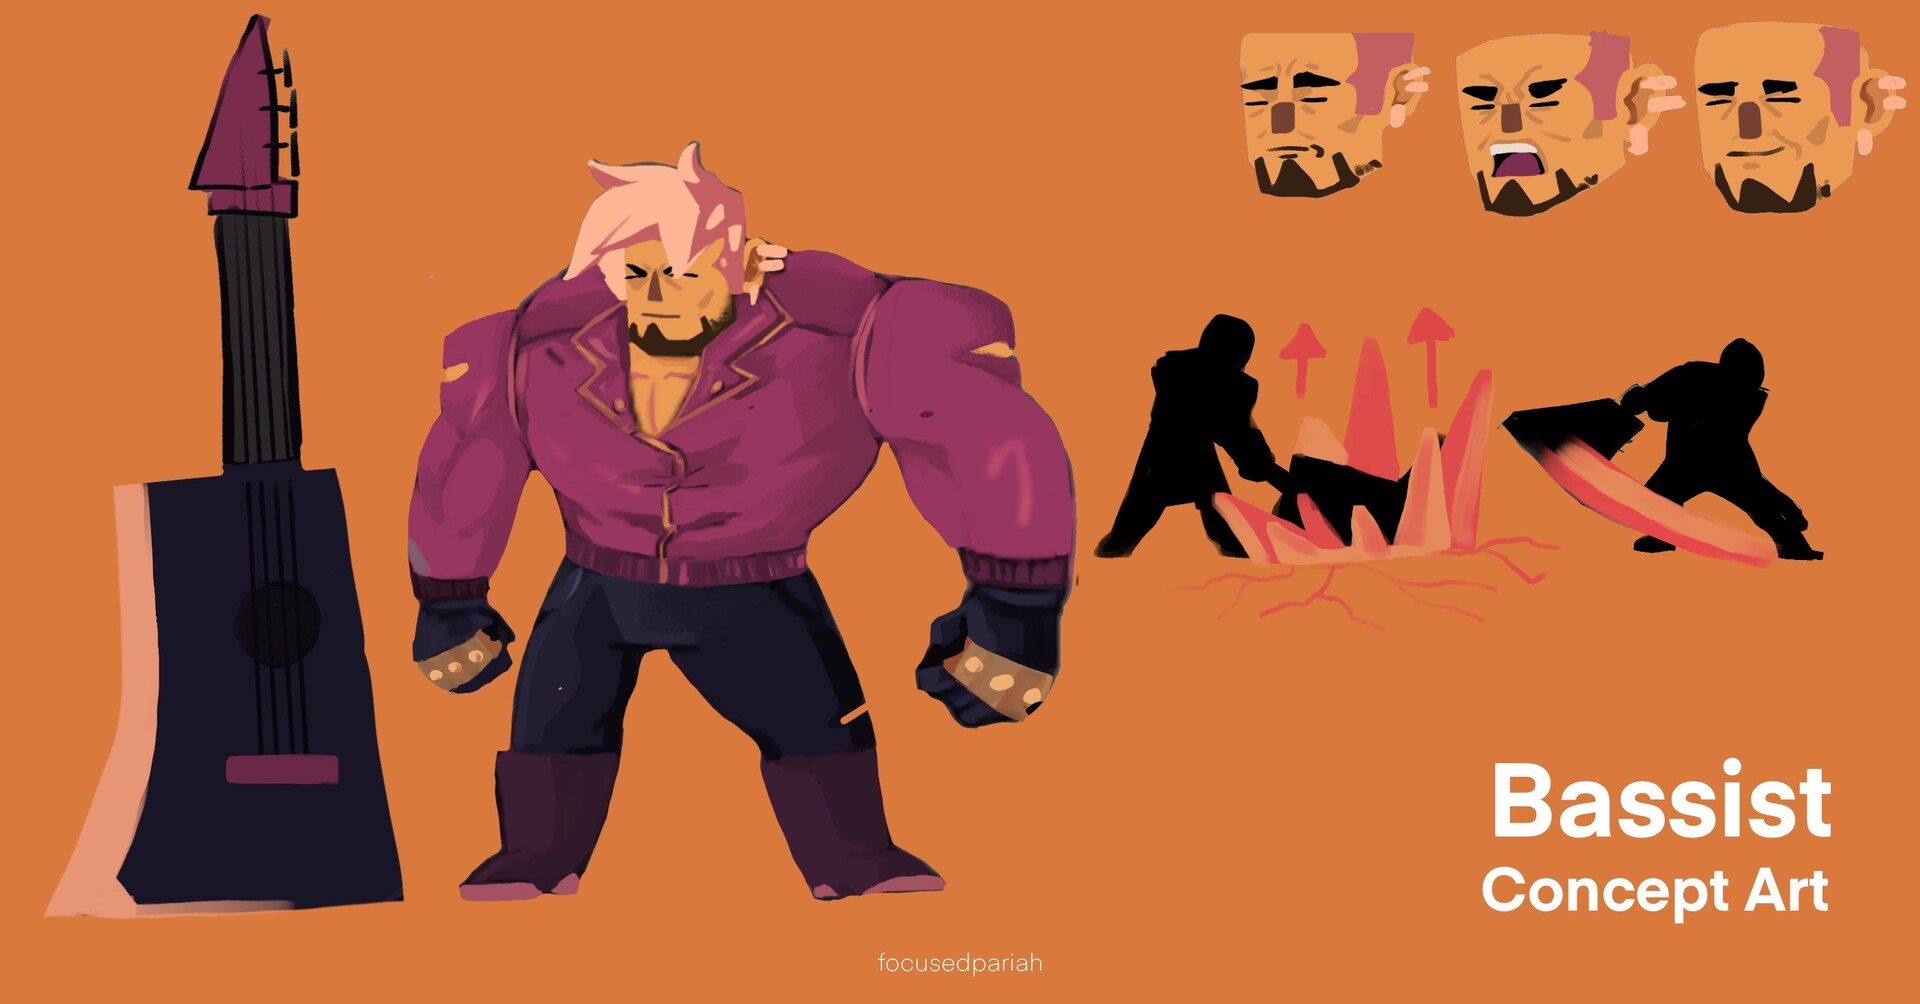 Christian Gabriel - Band Fighting Game Concept Art